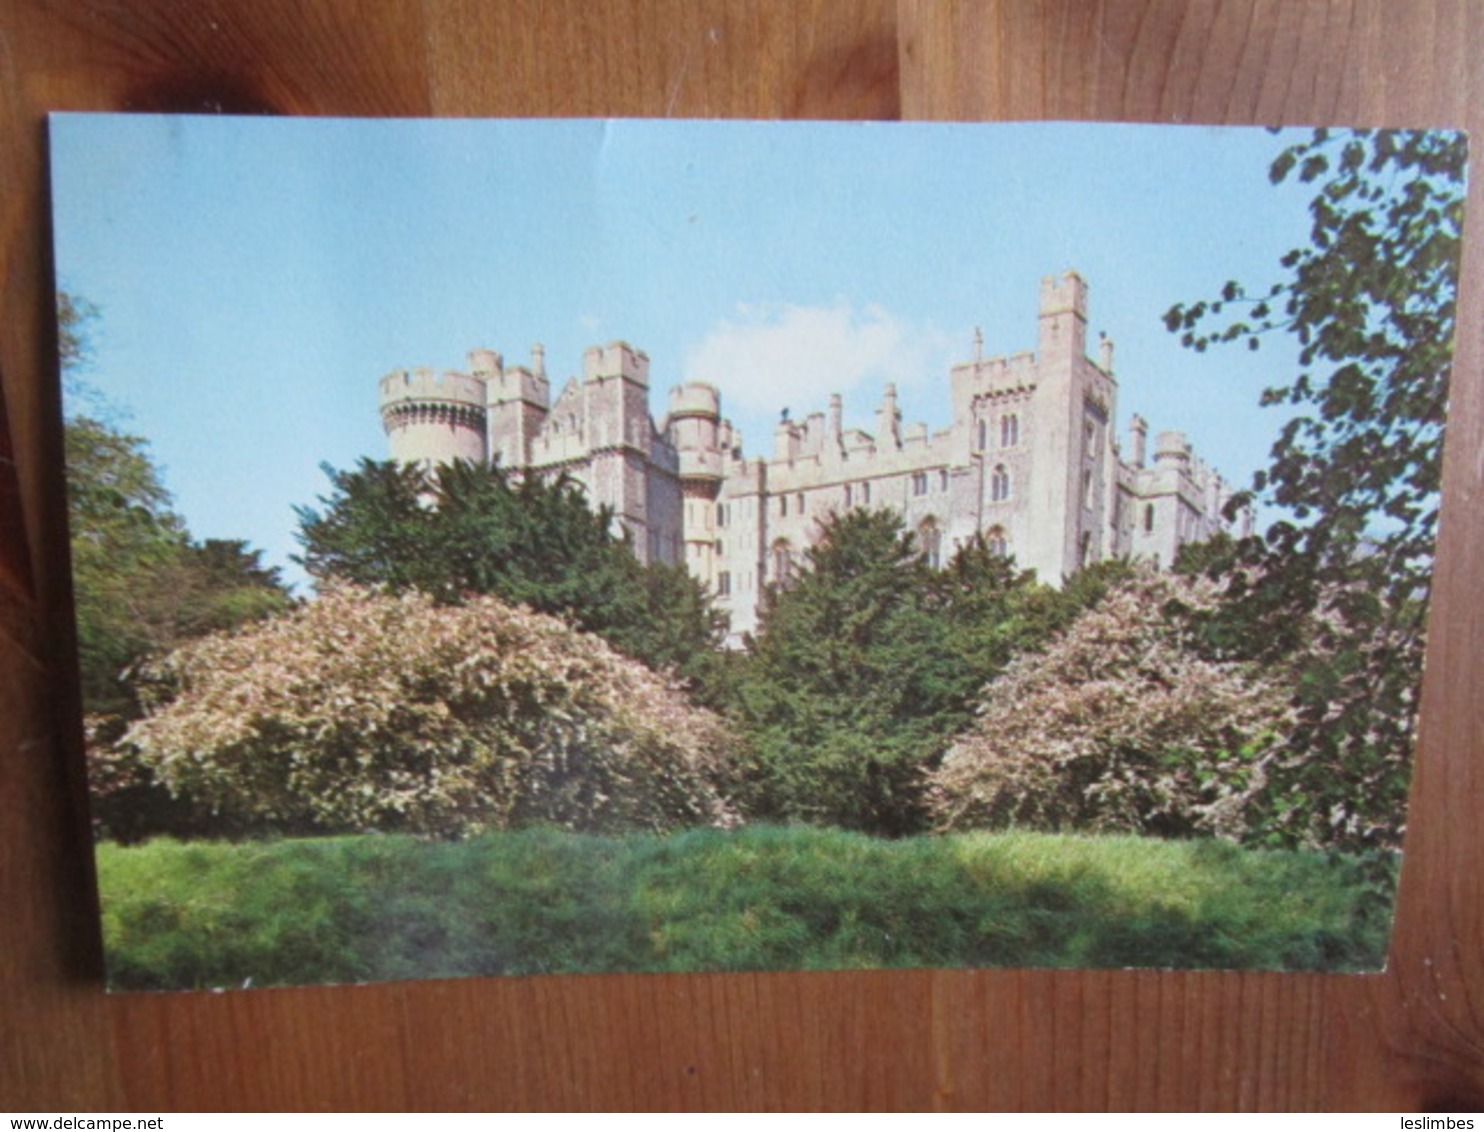 Arundel Castle Home Of The Duke Of Norfolk Built About 20 Years After The Norman Conquest. Plastichrome P42615 - Arundel